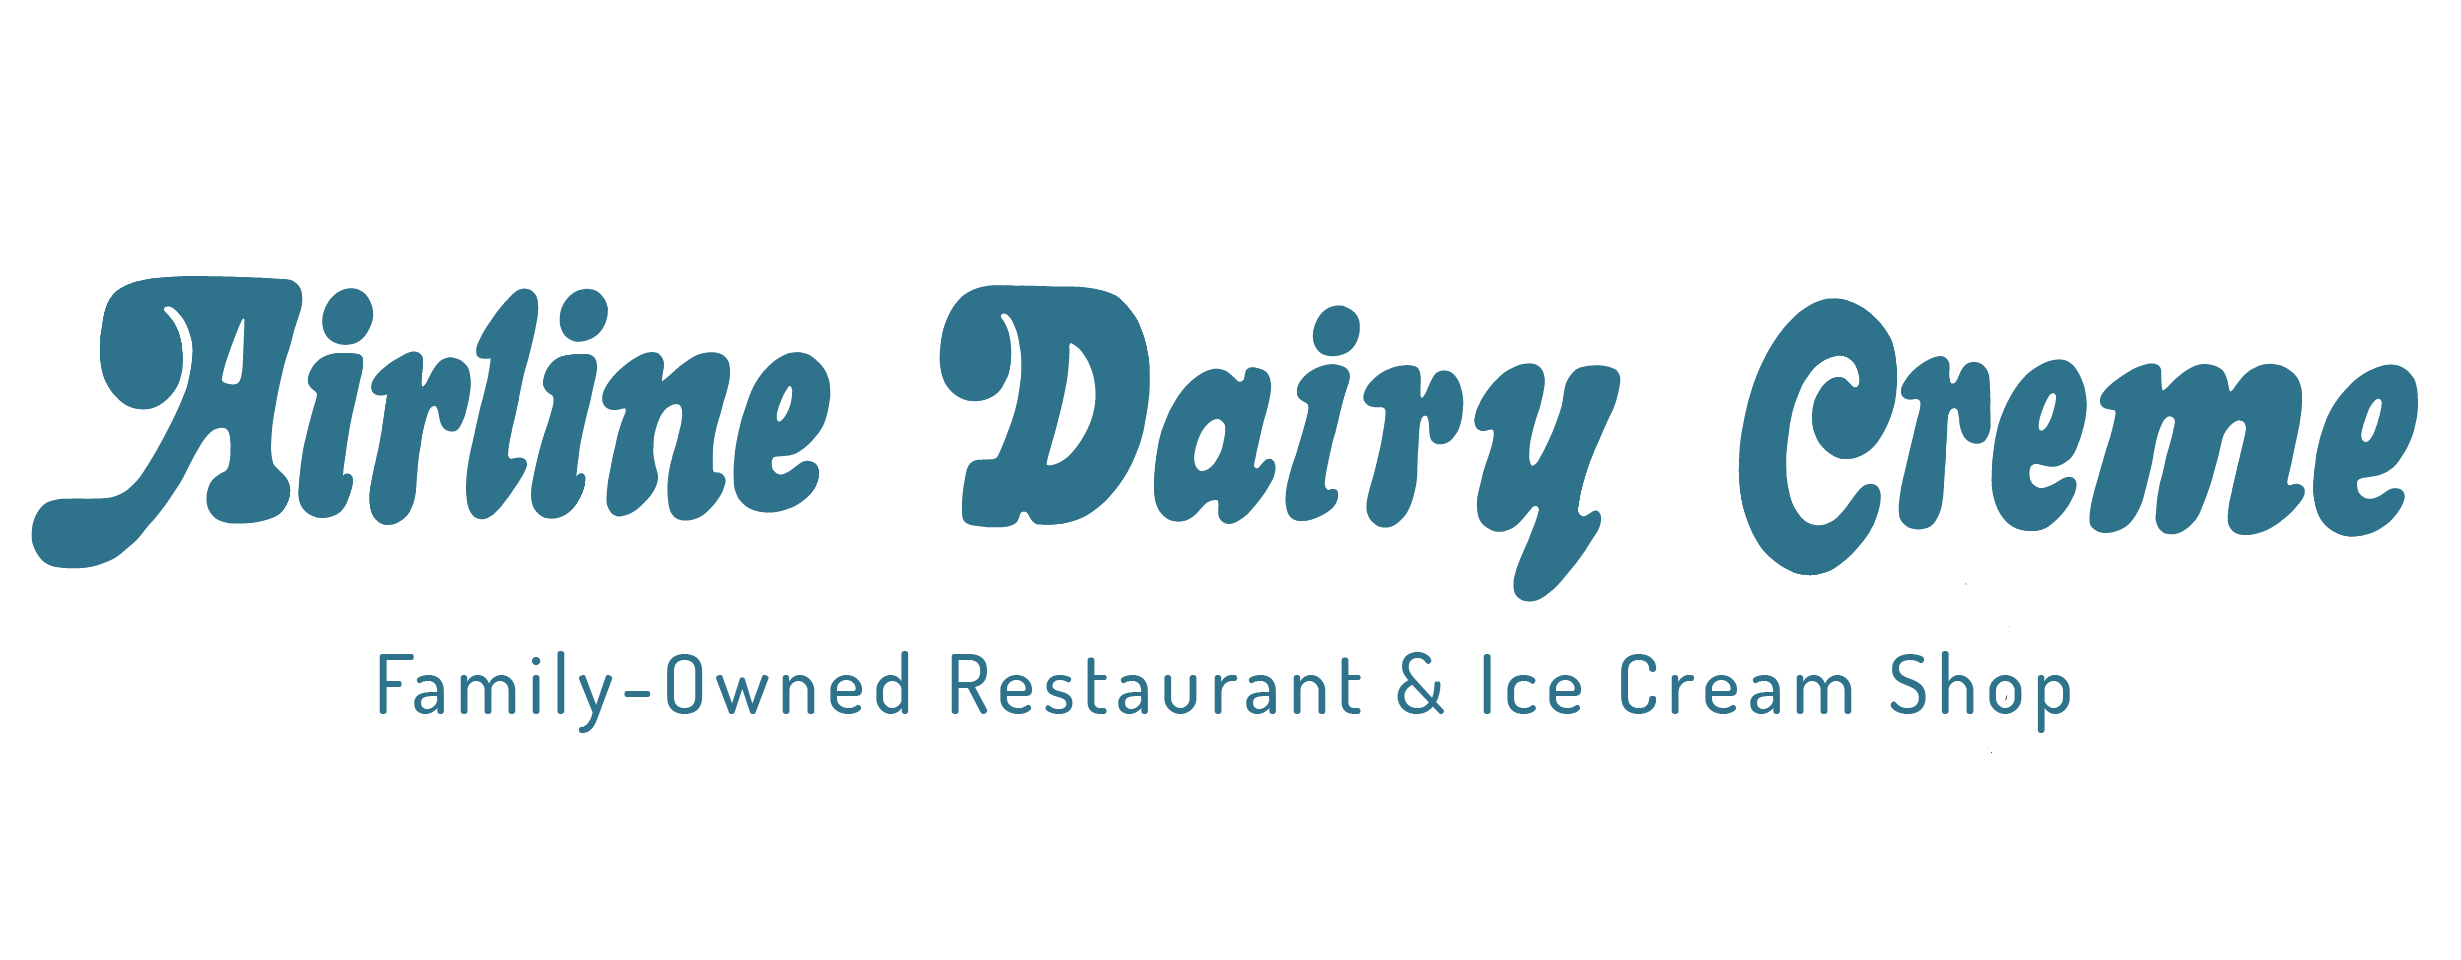 Airline Dairy Creme